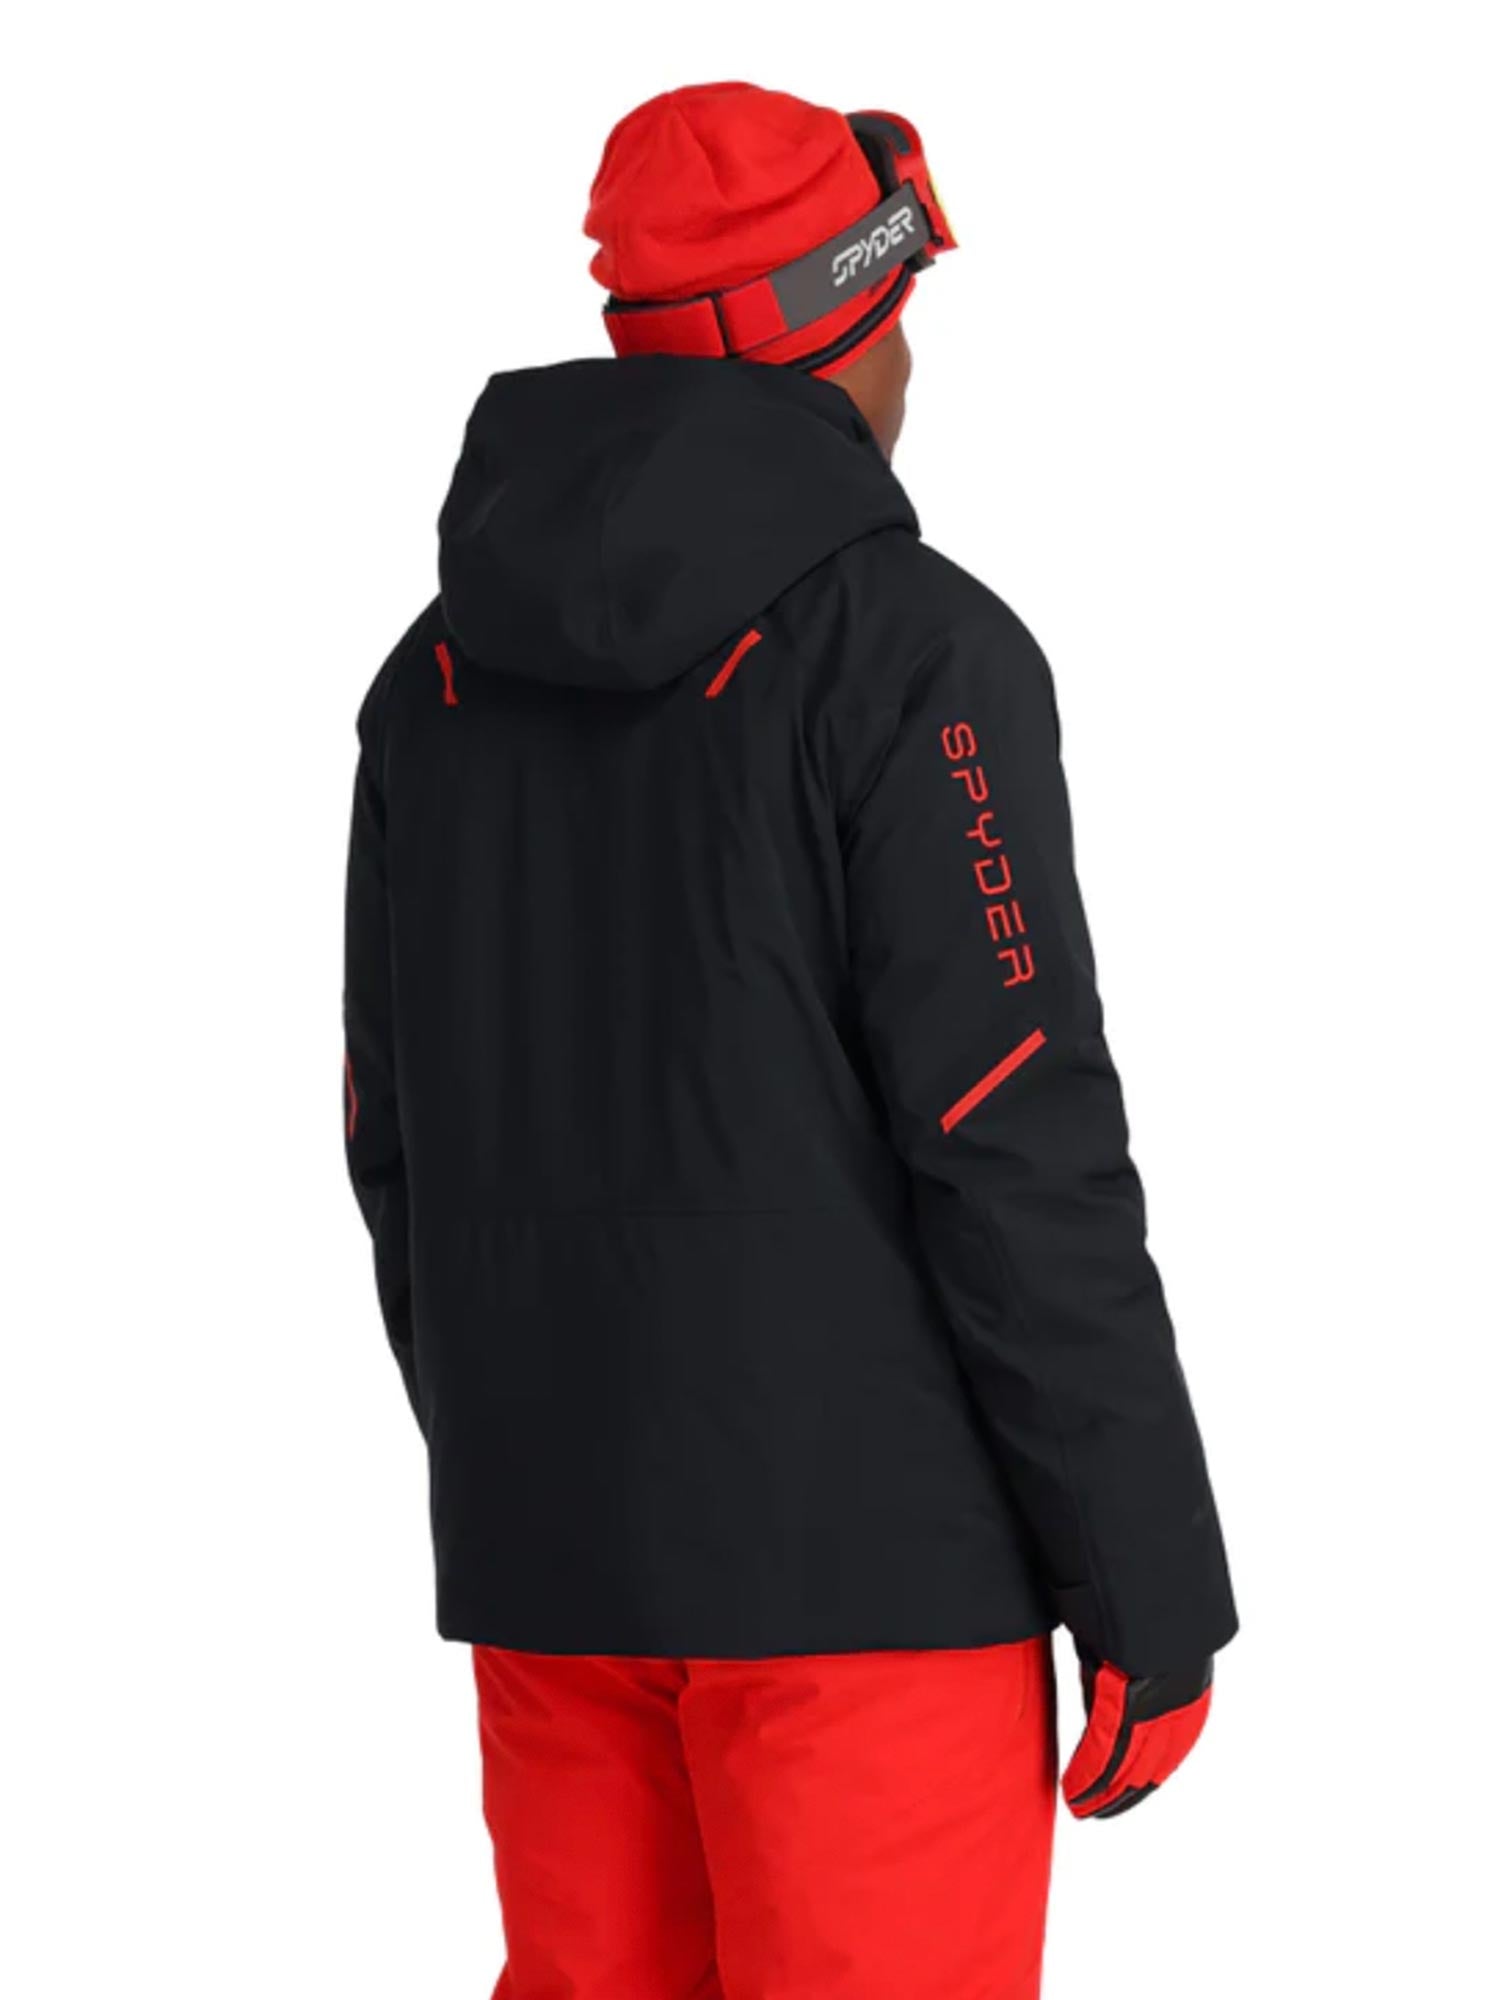 black Spyder ski jacket with red accents